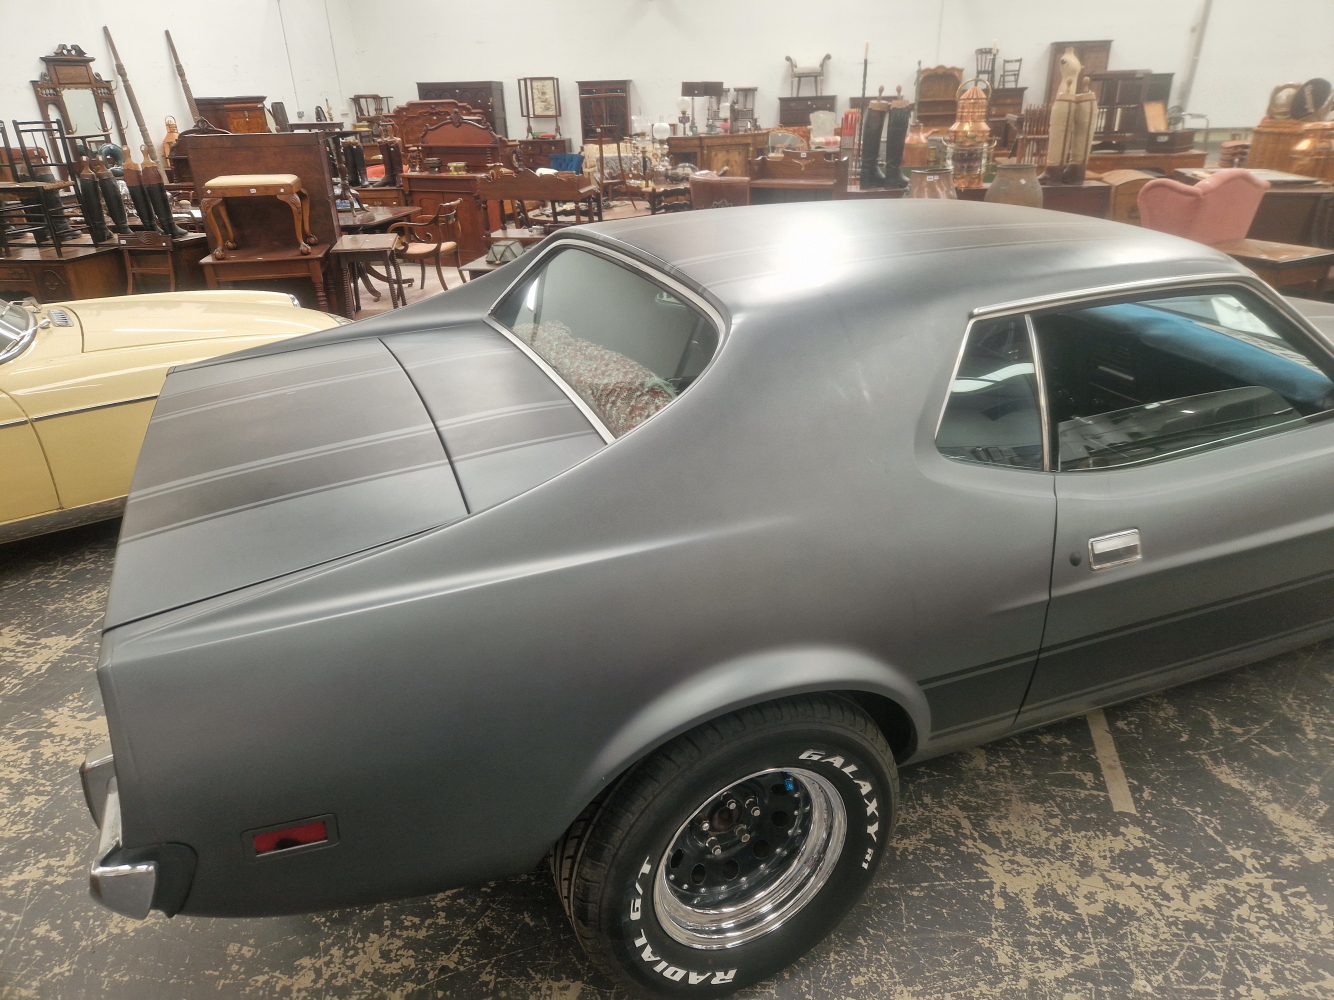 1973 FORD MUSTANG 302 CU.IN. V8 COUPE. EXCELLENT RUNNER AND DRIVER. RECENT FULL REPAINT IN MATTE - Image 2 of 50